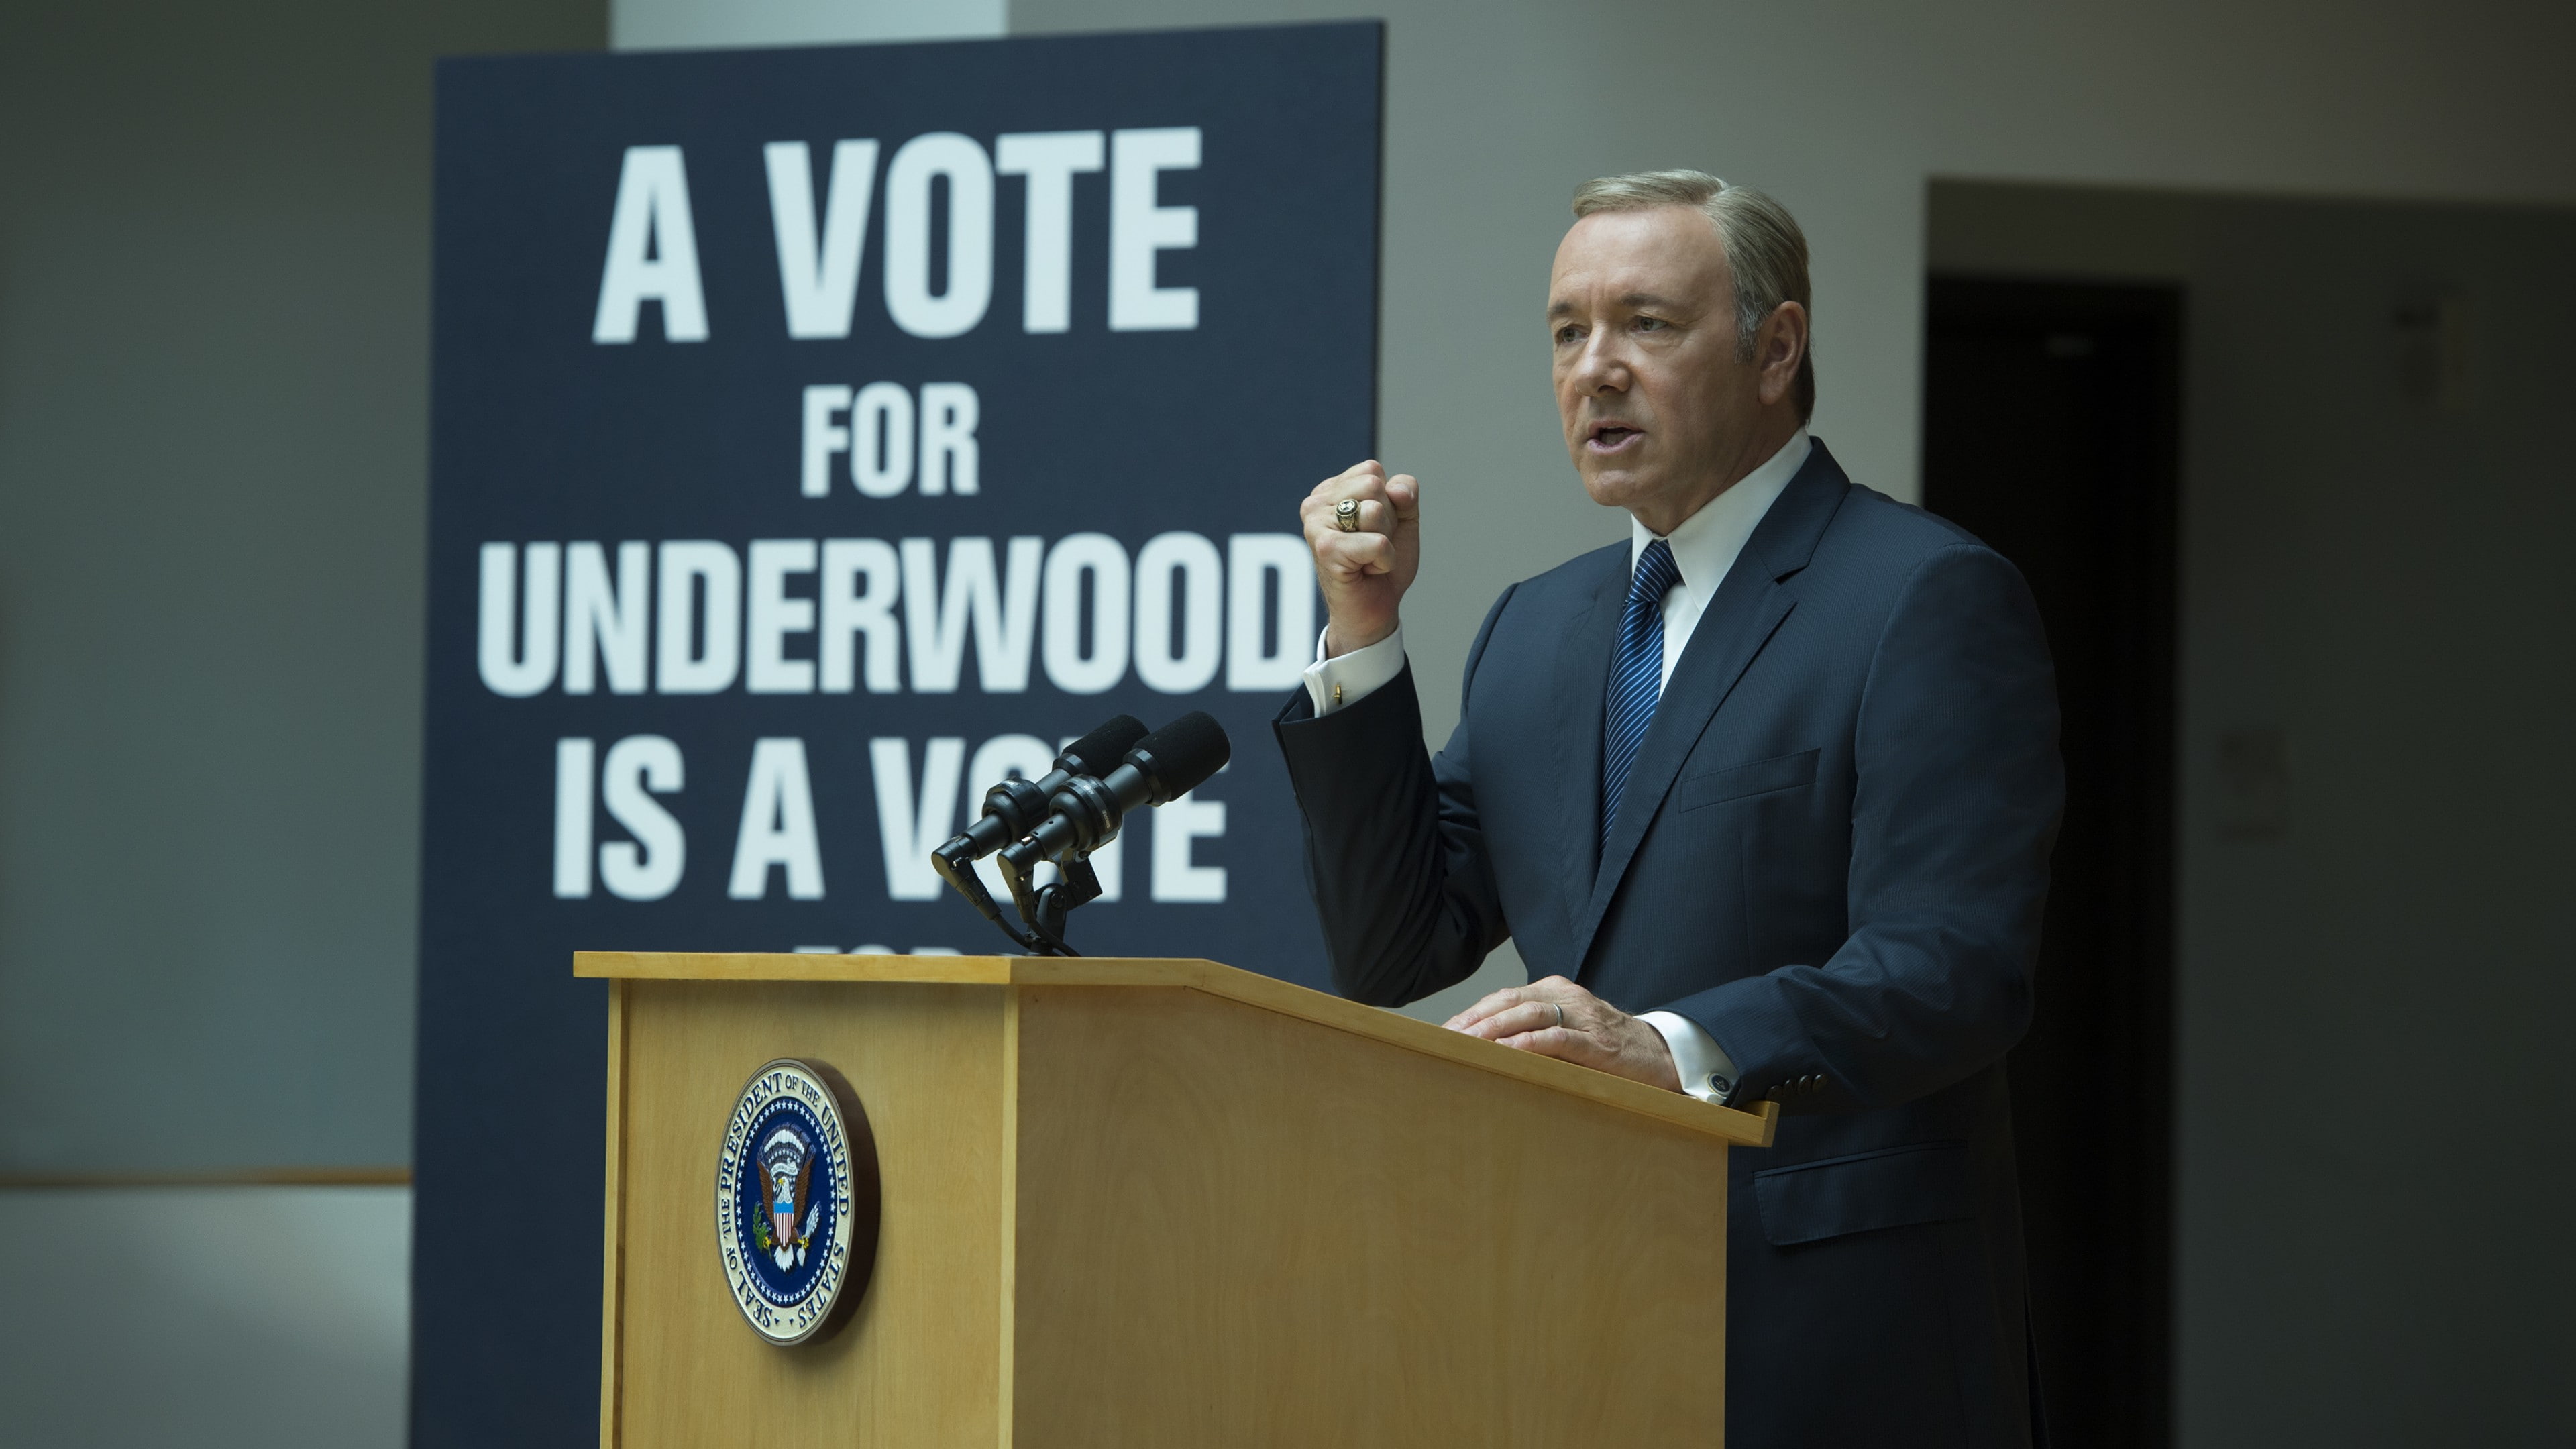 House of Cards, Best TV Series, political, Kevin Spacey, season 5